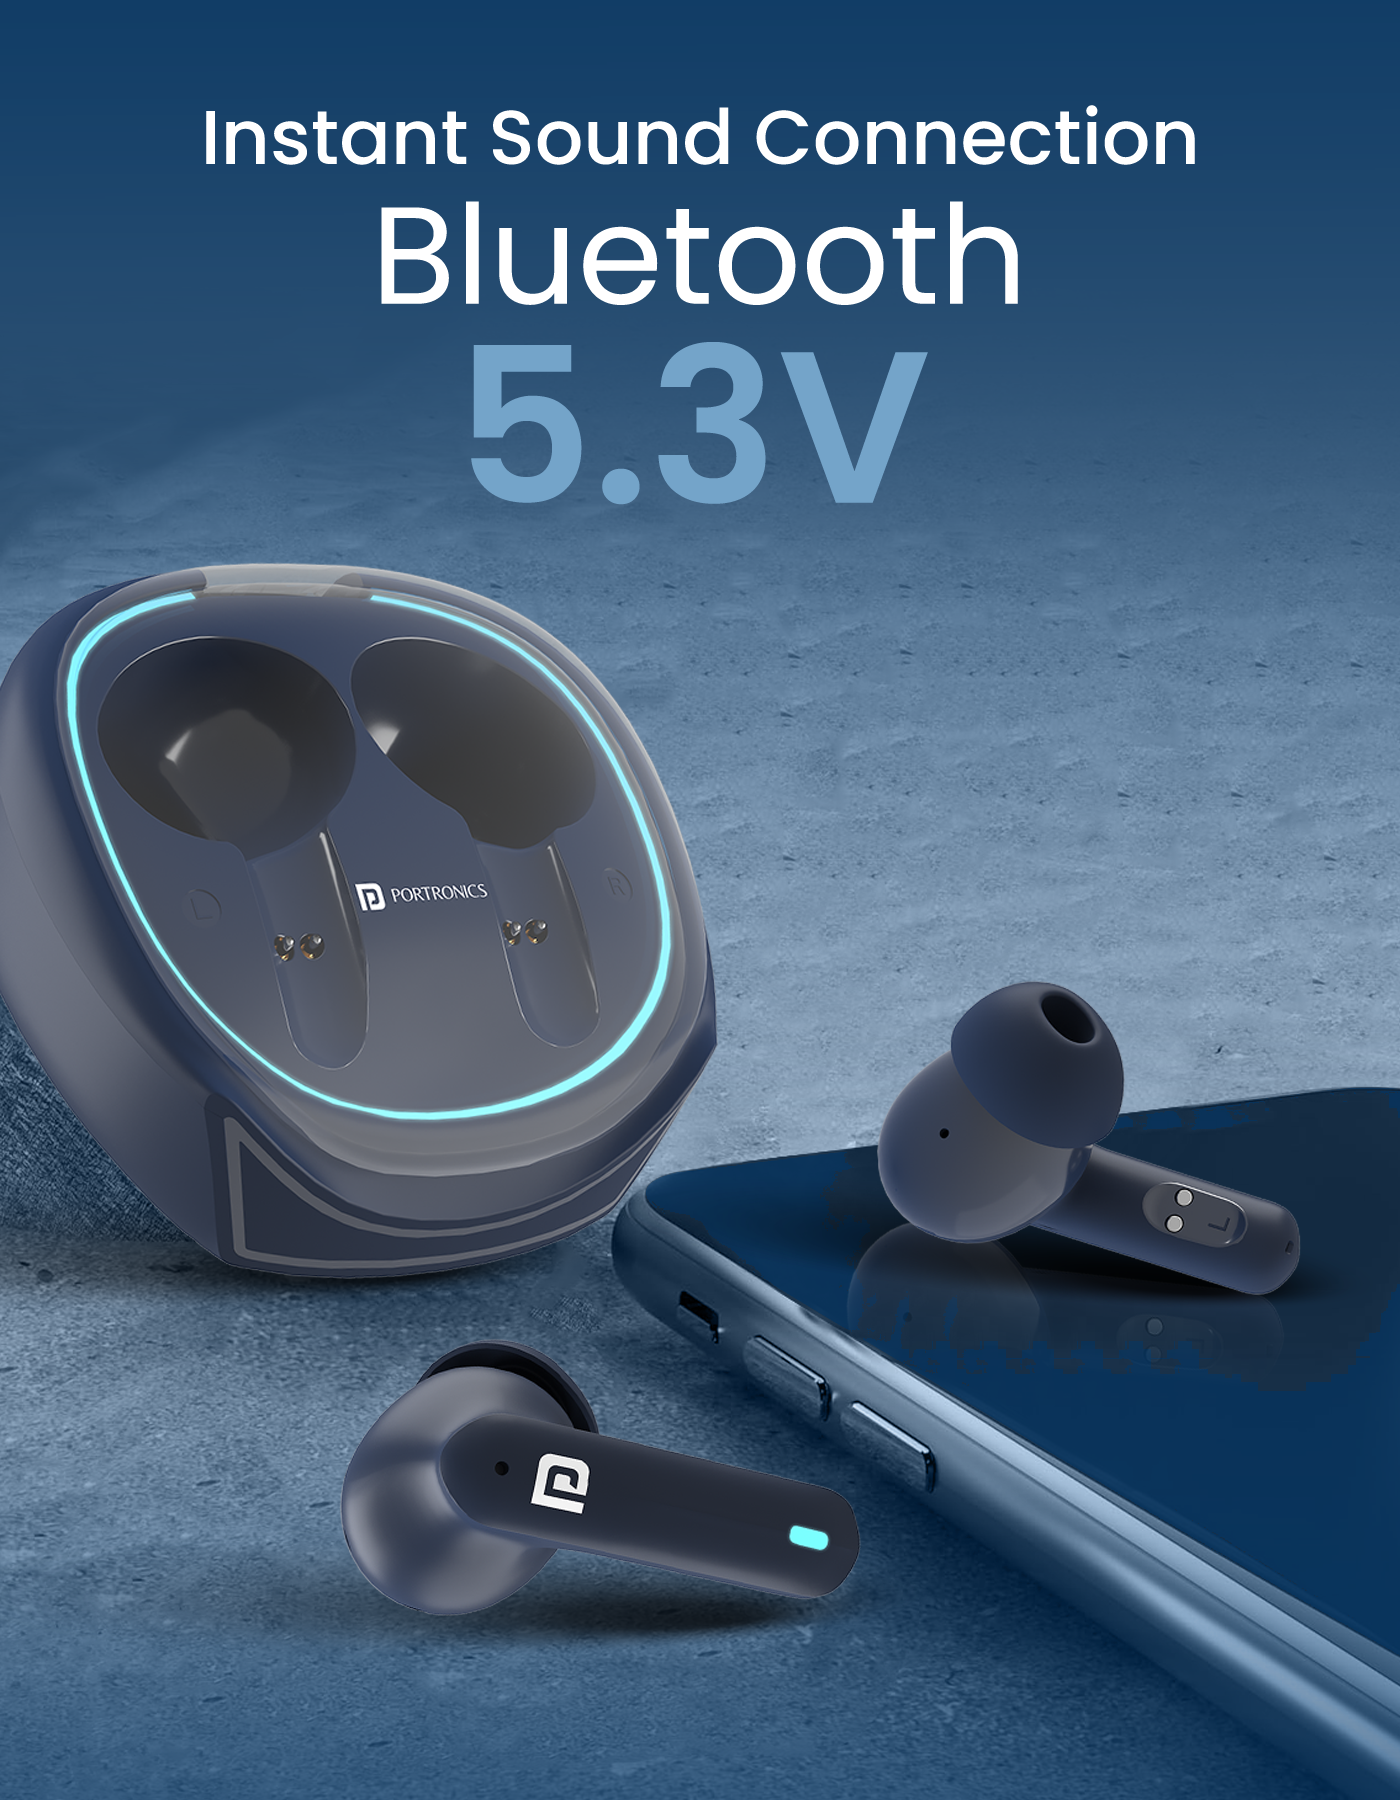 Fast Connecting wireless tws earbuds from portronics